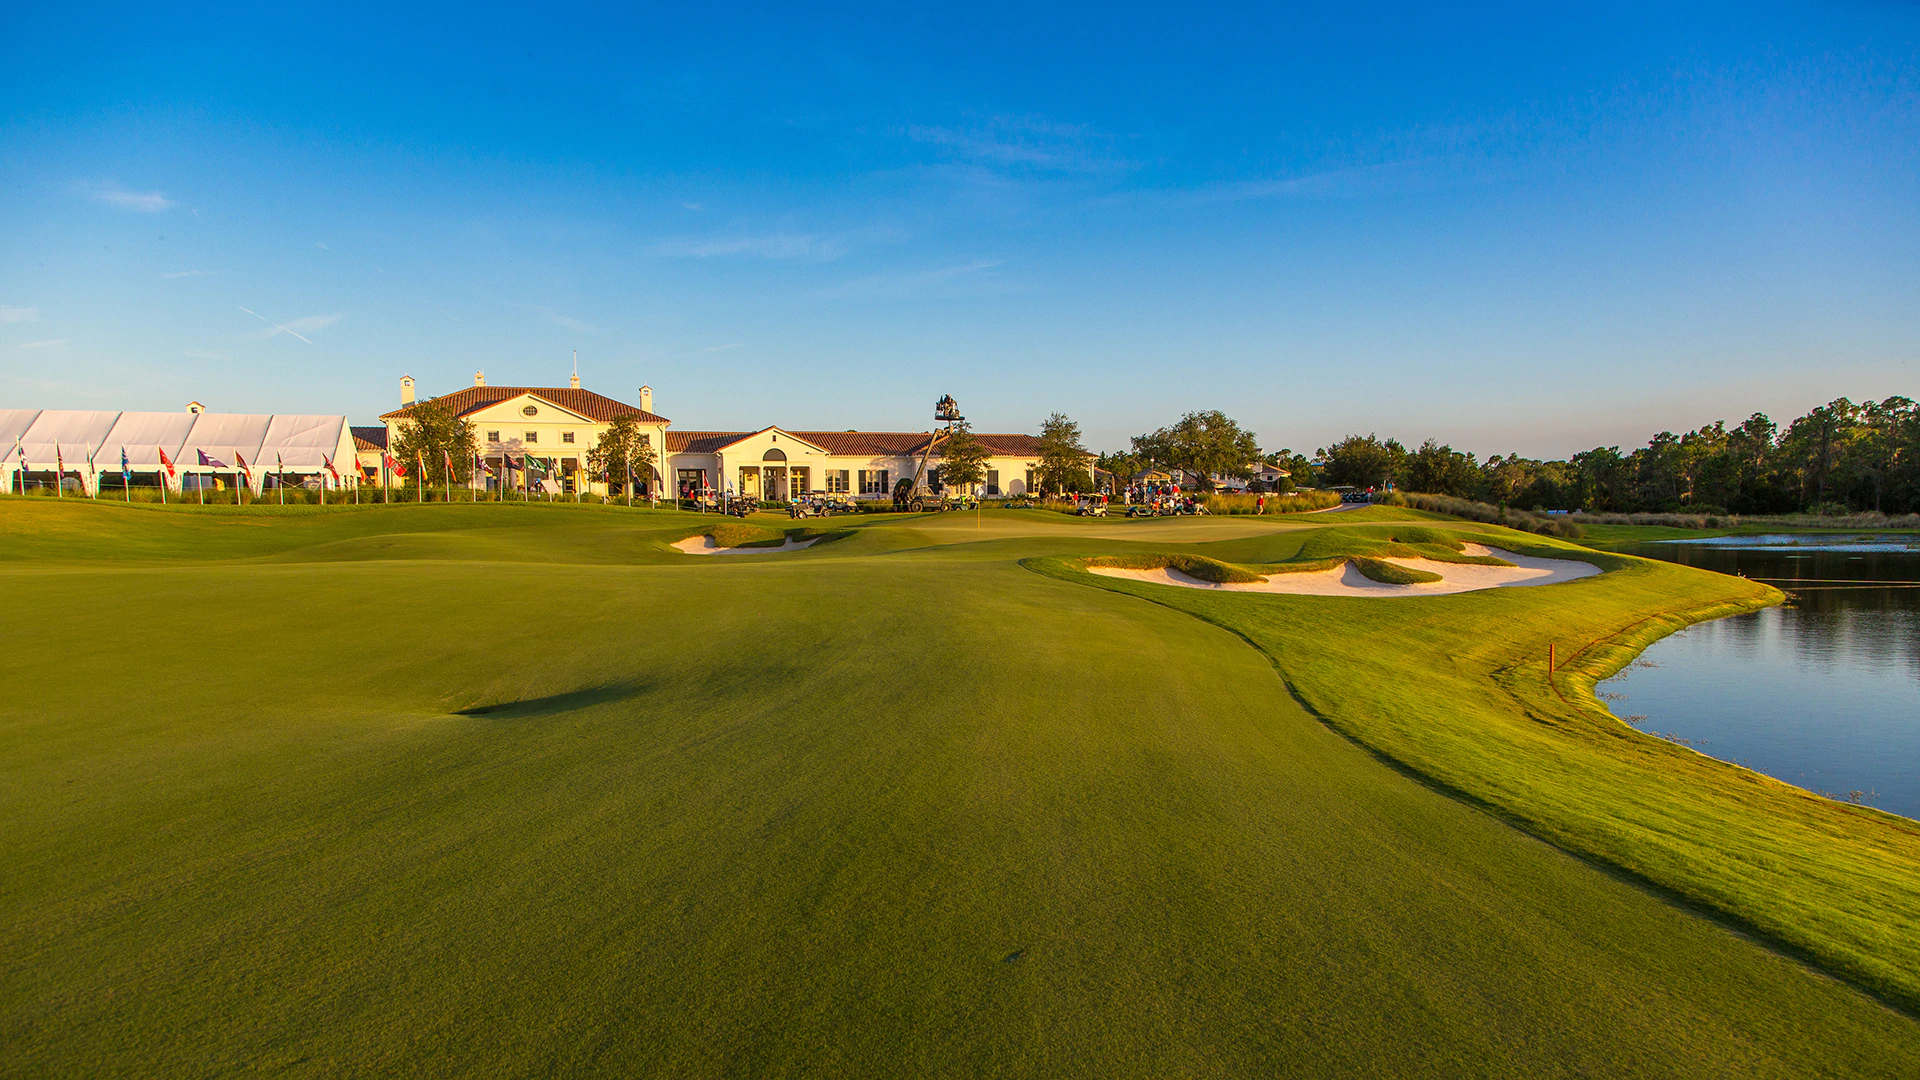 Next month’s WGC-Mexico relocated to Florida’s Concession Golf Club